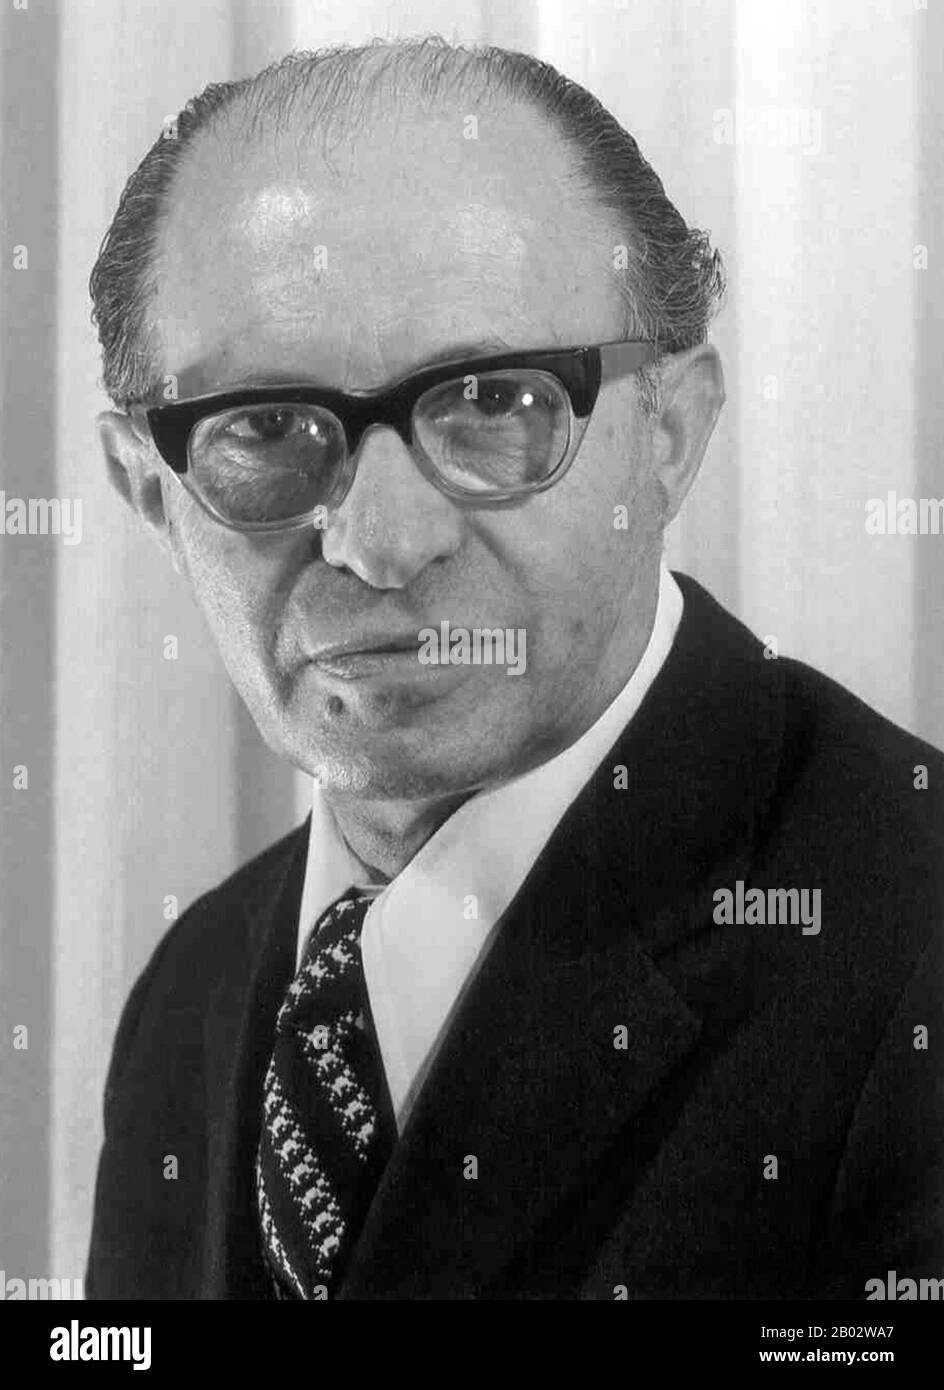 Menachem Begin (16 August 1913 – 9 March 1992) was an Israeli politician, founder of Likud and the sixth Prime Minister of the State of Israel. Before the creation of the state of Israel, he was the leader of the Zionist militant group Irgun, the Revisionist breakaway from the larger Jewish paramilitary organization Haganah. He proclaimed a revolt, on 1 February 1944, against the British mandatory government, which was opposed by the Jewish Agency. As head of the Irgun, he targeted the British in Palestine. During his leadership Irgun targeted Palestinian civilians in the Deir Yassin massacre. Stock Photo